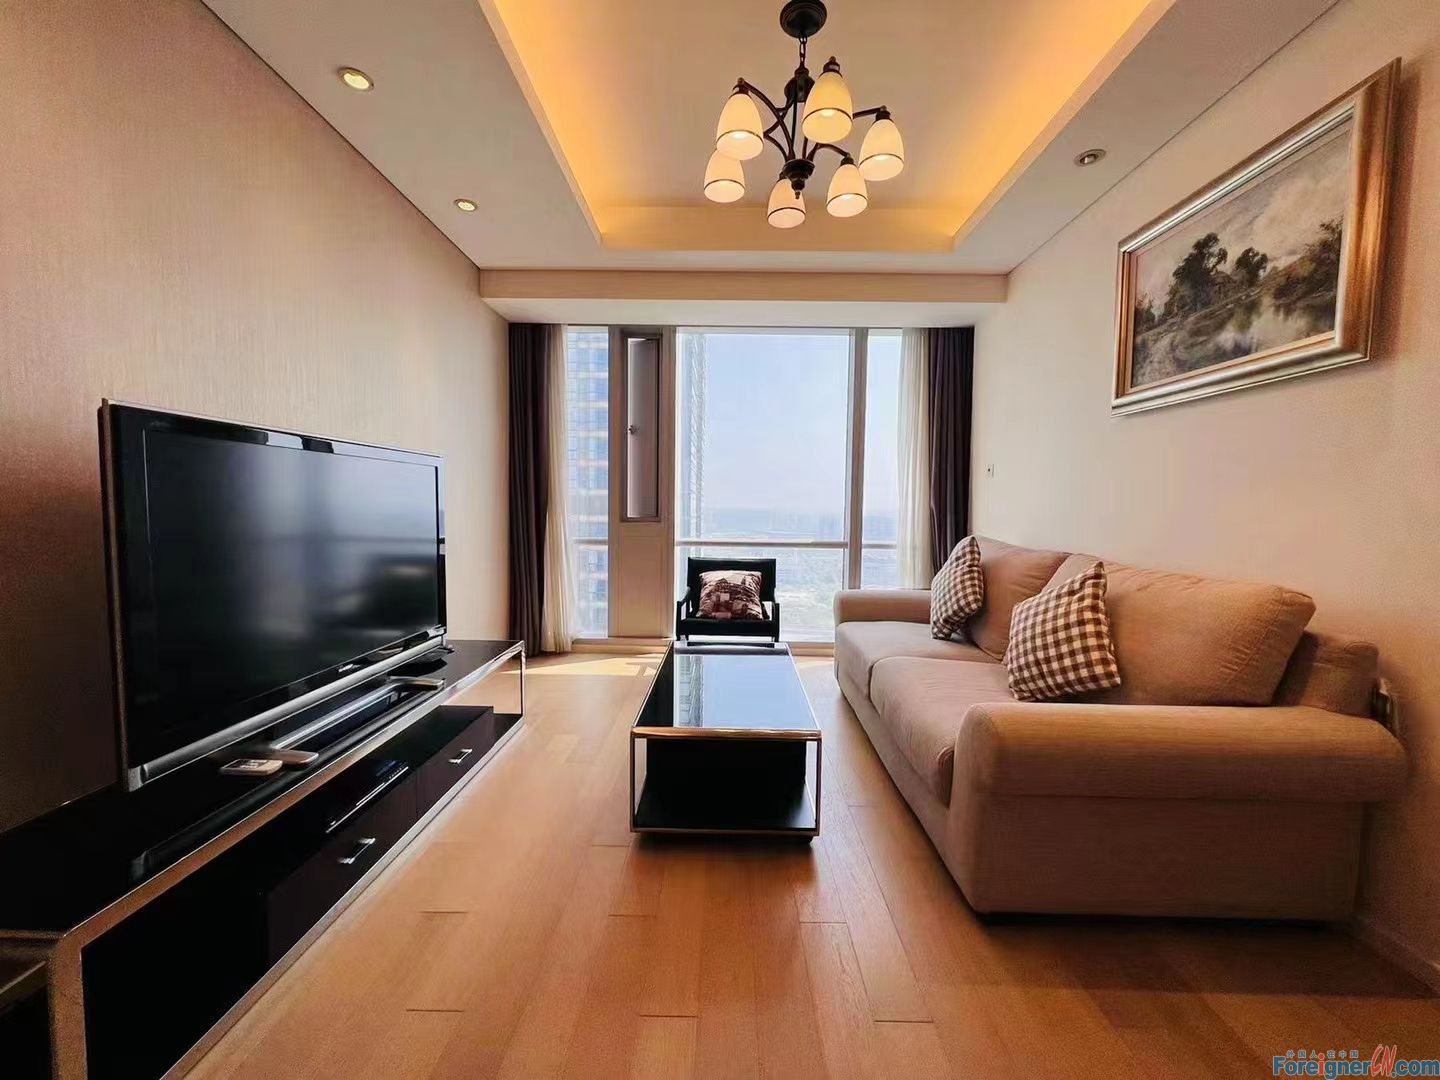 Beautiful!!! High Floor Apartment rent in SuZhou/Large Windows with lots of light/Central AC，Floor heating/Bathtub/Xinghai Square Shopping Center nearby